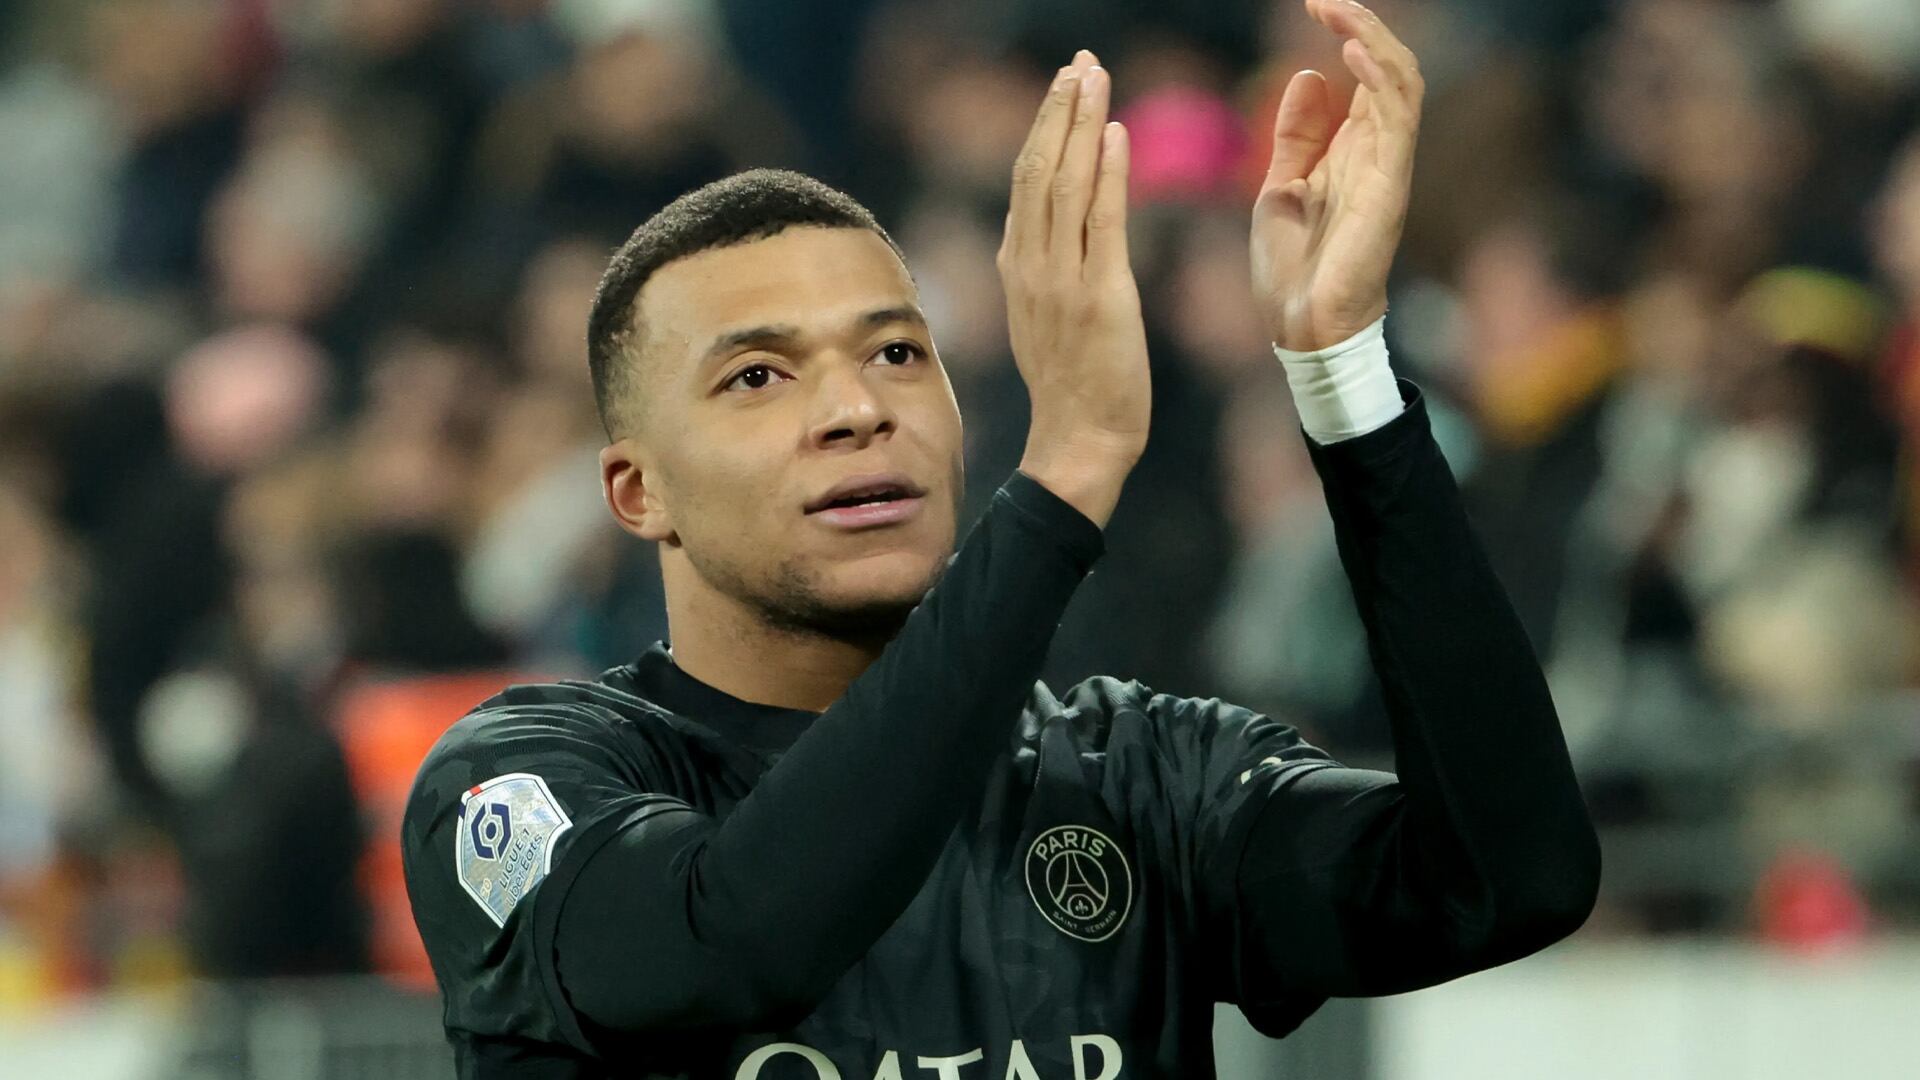 Small wink from Mbappe, clues begin about his possible arrival to the Premier